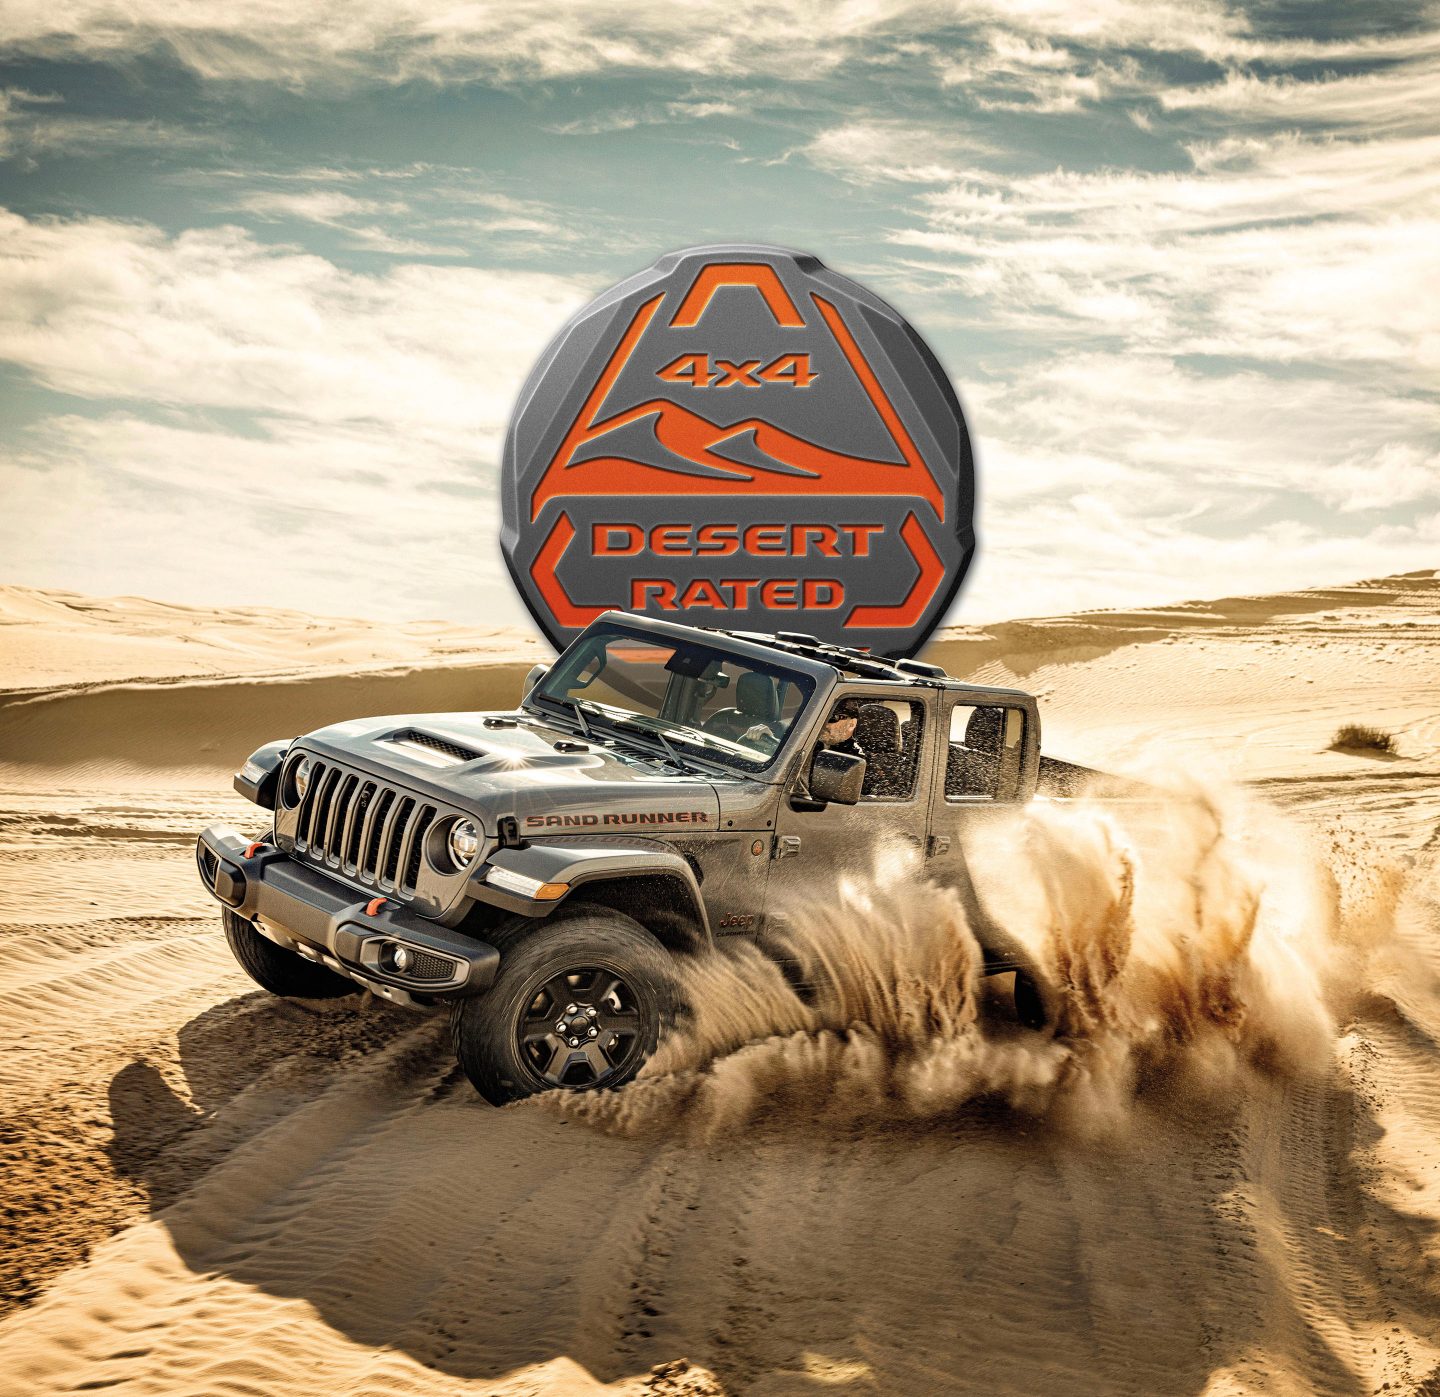 Trail Rated 4x4. The 2022 Jeep Gladiator Rubicon being driven on rocky terrain with one wheel elevated as it climbs a boulder.